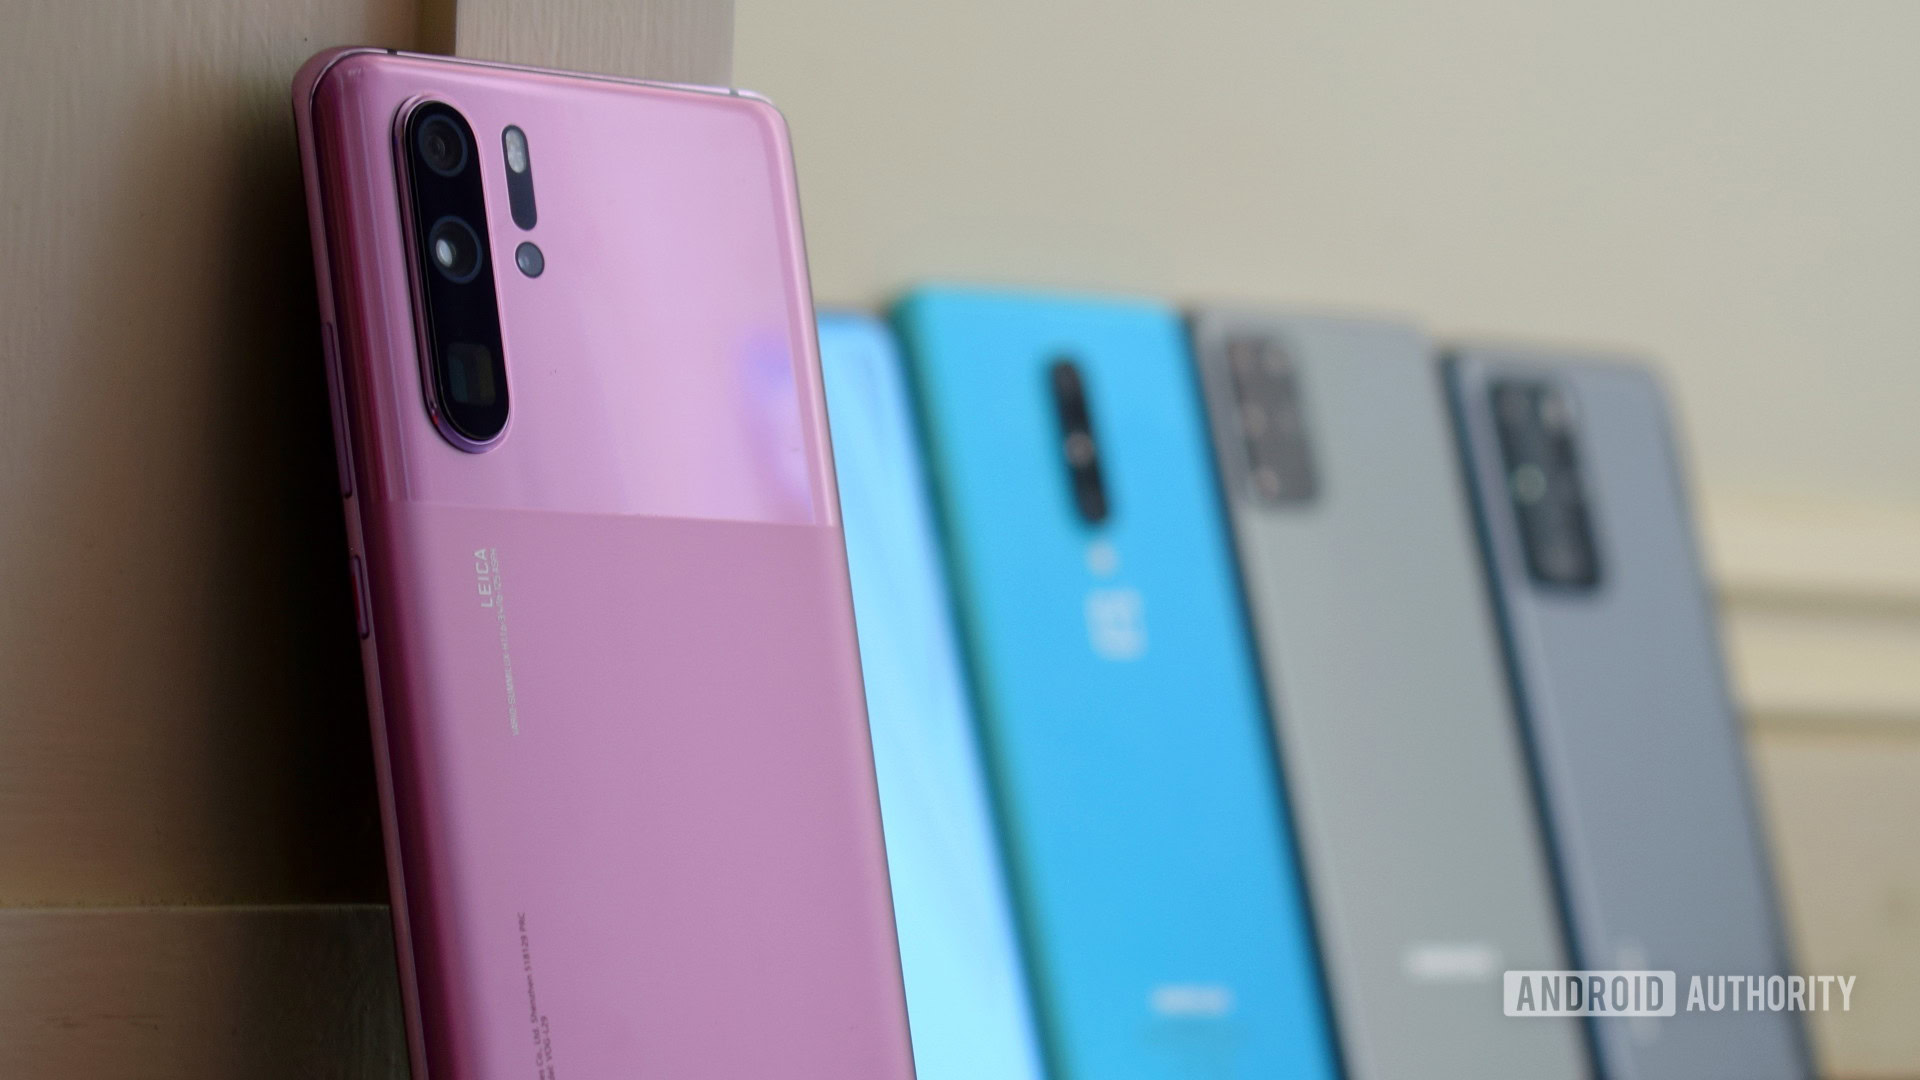 HUAWEI P30 Pro long-term review: Still worth buying? - Android